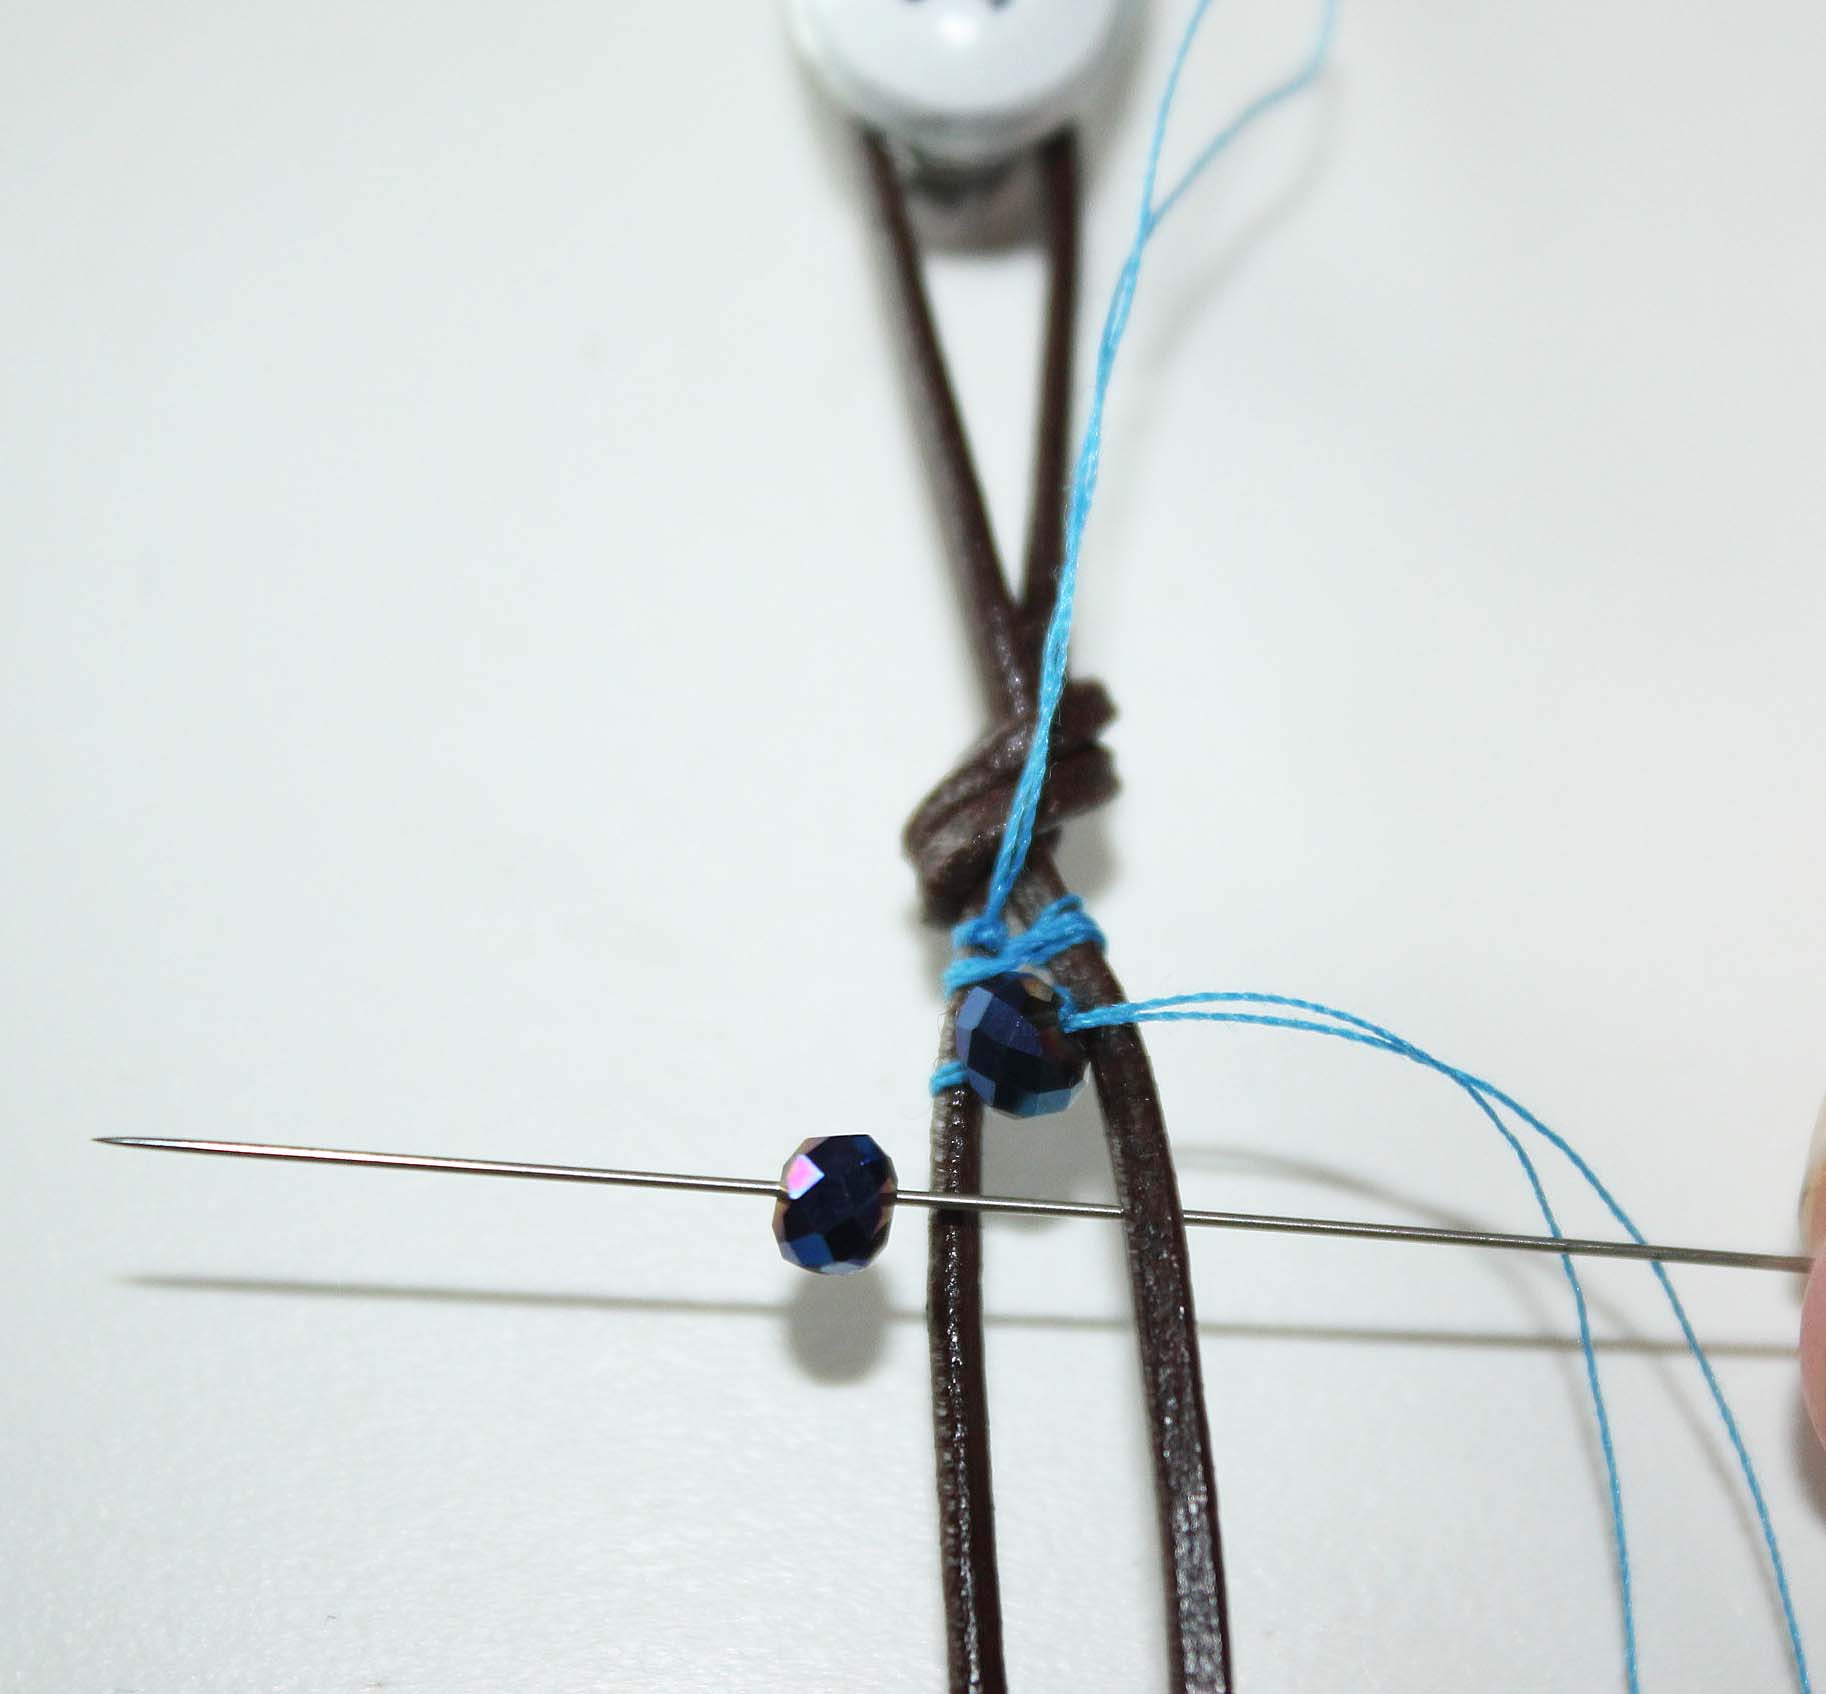 Add second bead by threading under leather cord up through center of cords, add bead and thread out over top of the other leather cord.